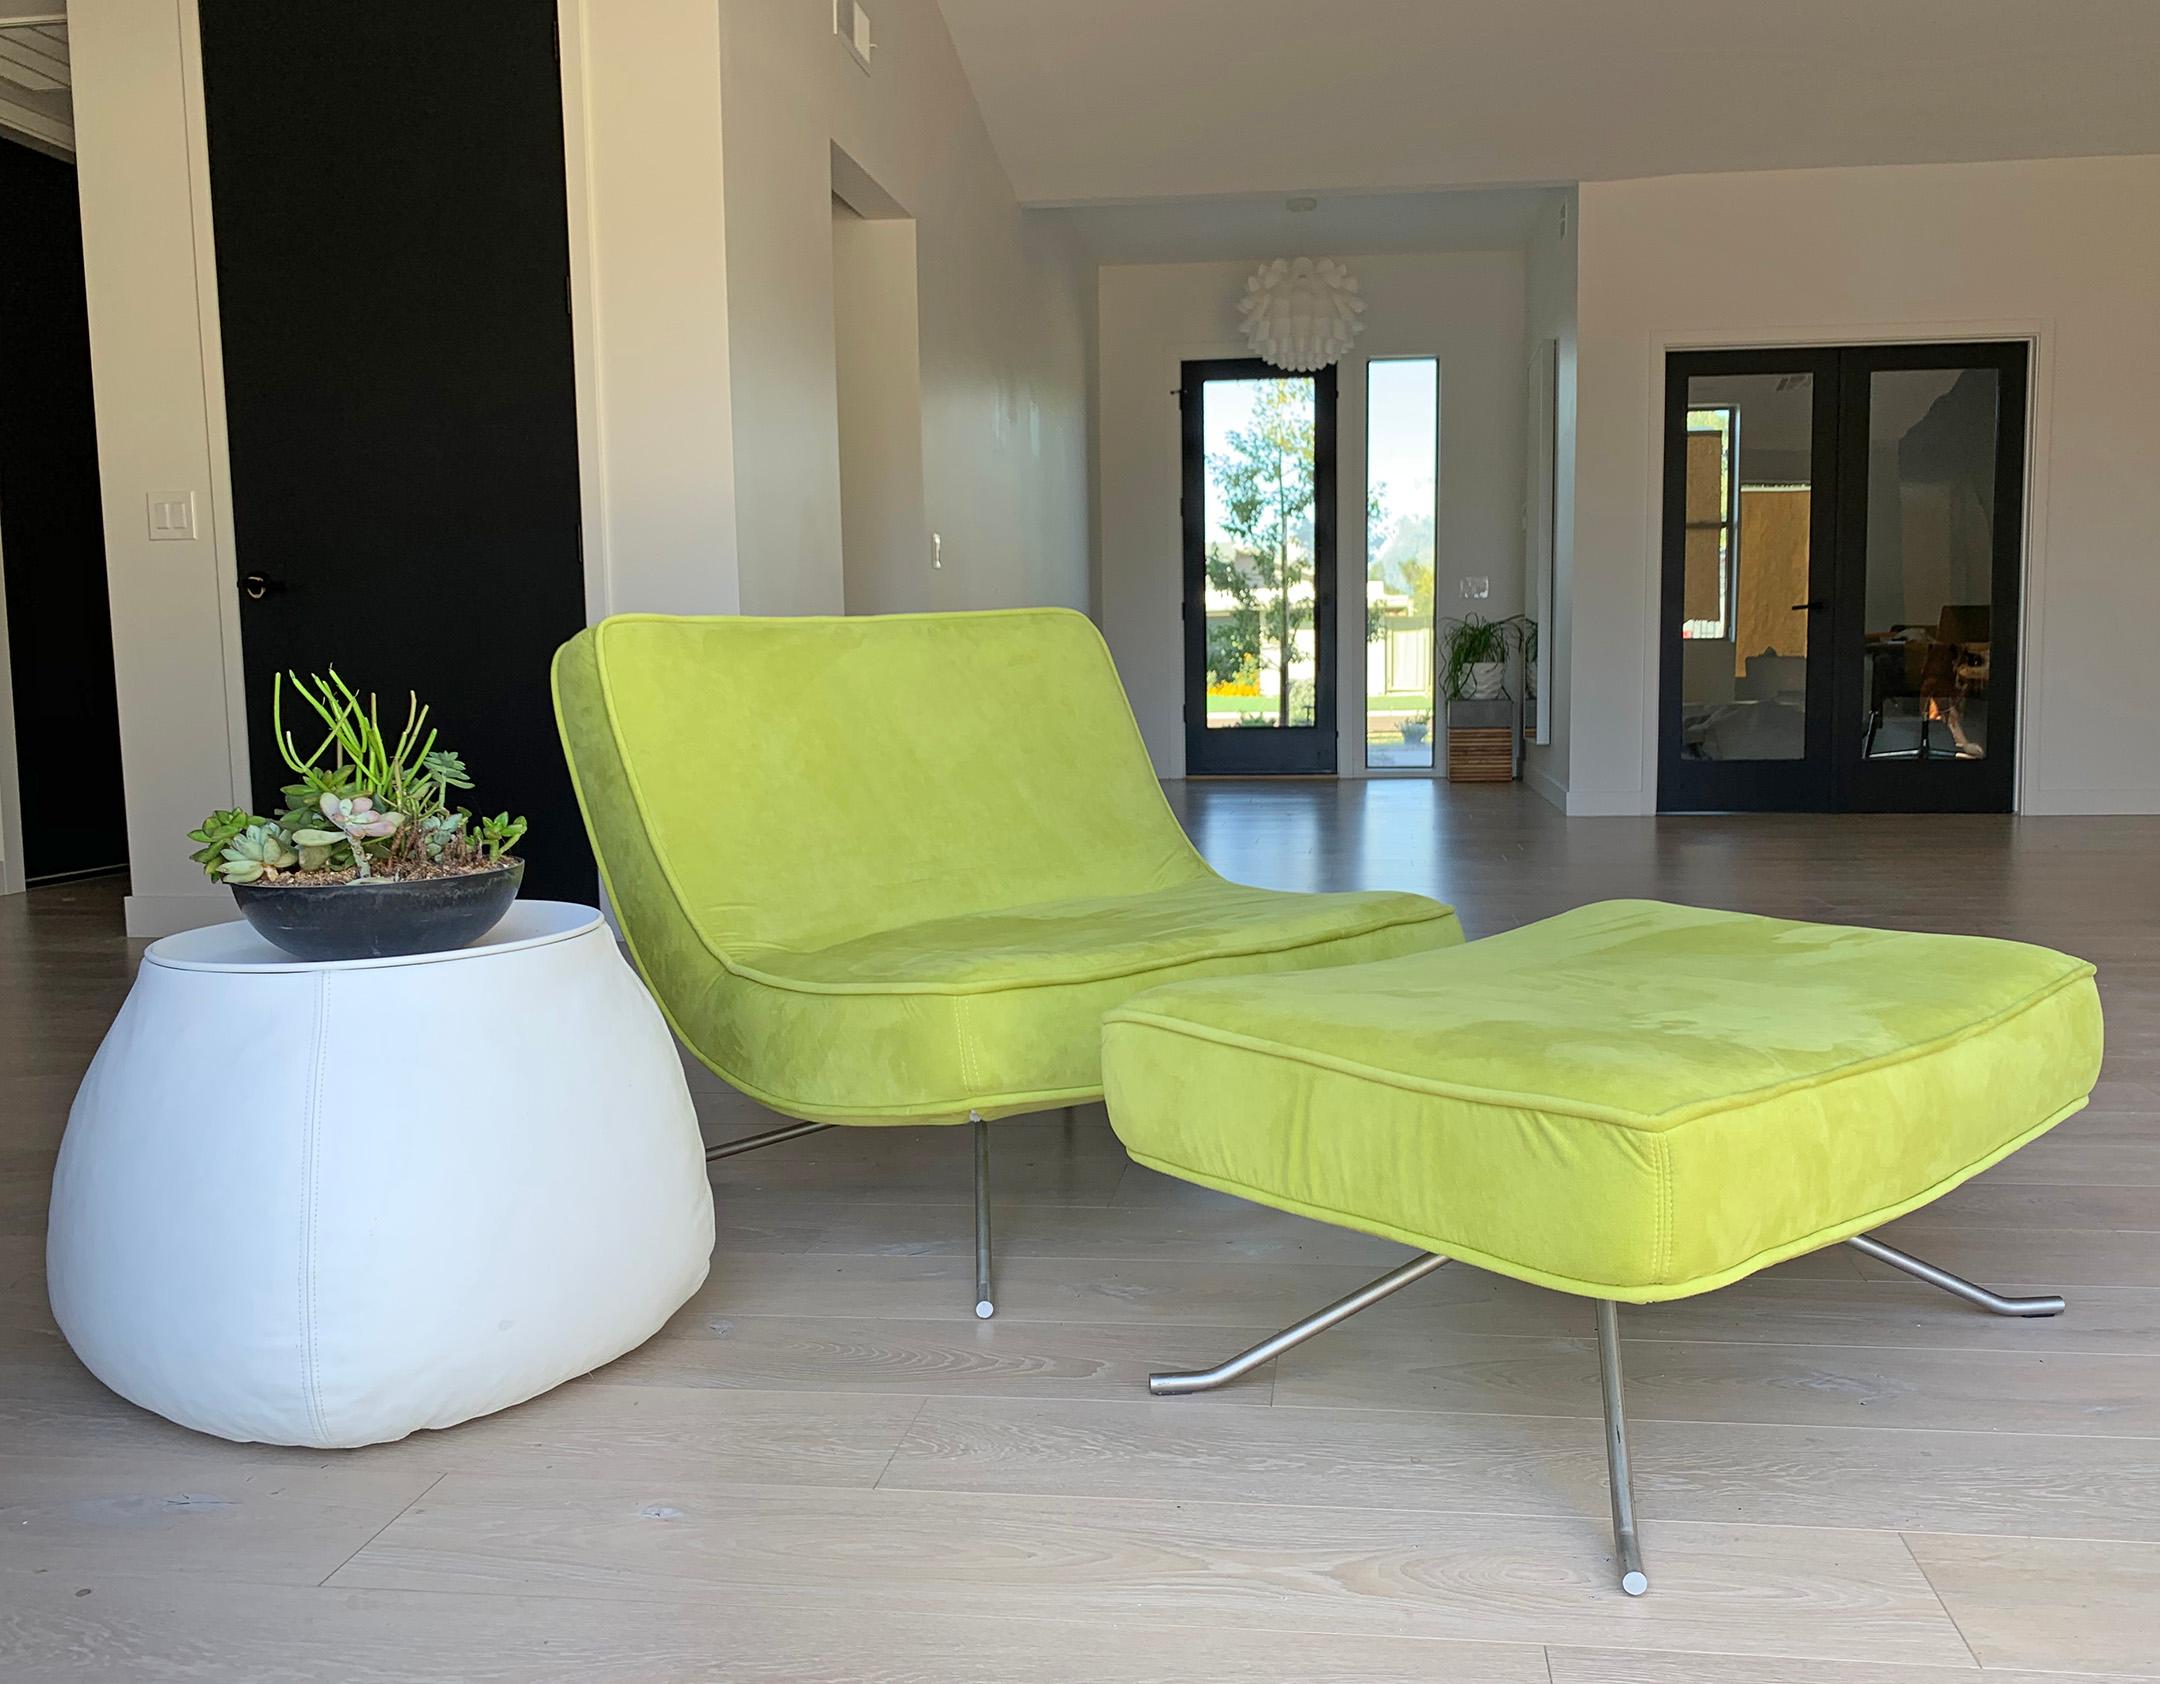 An absolutely stunning chair designed by Christian Werener for Ligne Roset, 2001. This lime green Pop Chair and ottoman feature curvy, clean lines with a modern feel. This transitional lounge chair would look incredible in almost any environment as